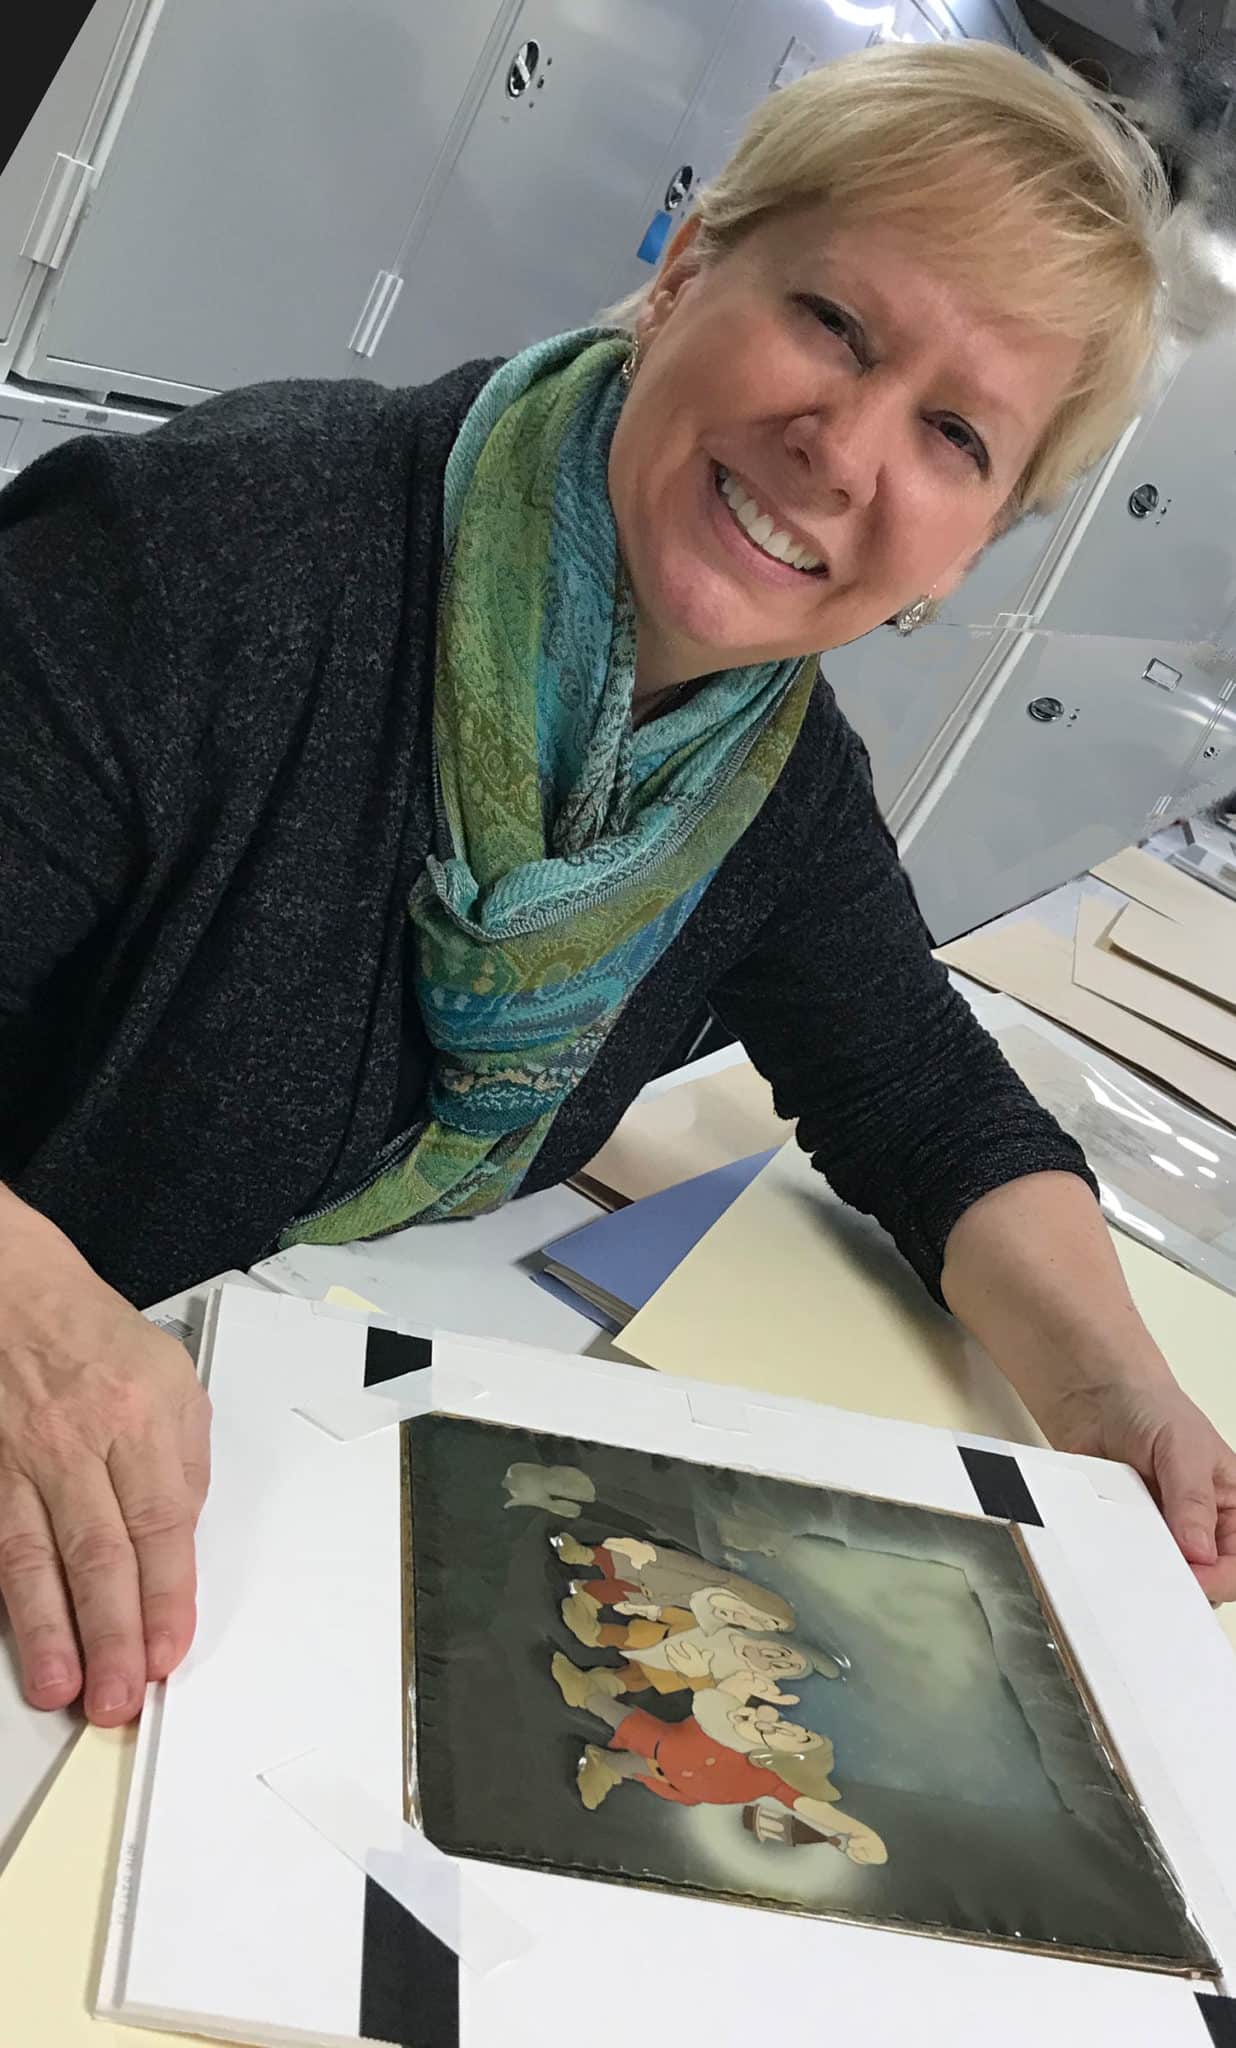 Mindy Johnson, wearing blue and green scarf, smiles while holding "Snow White" production cel